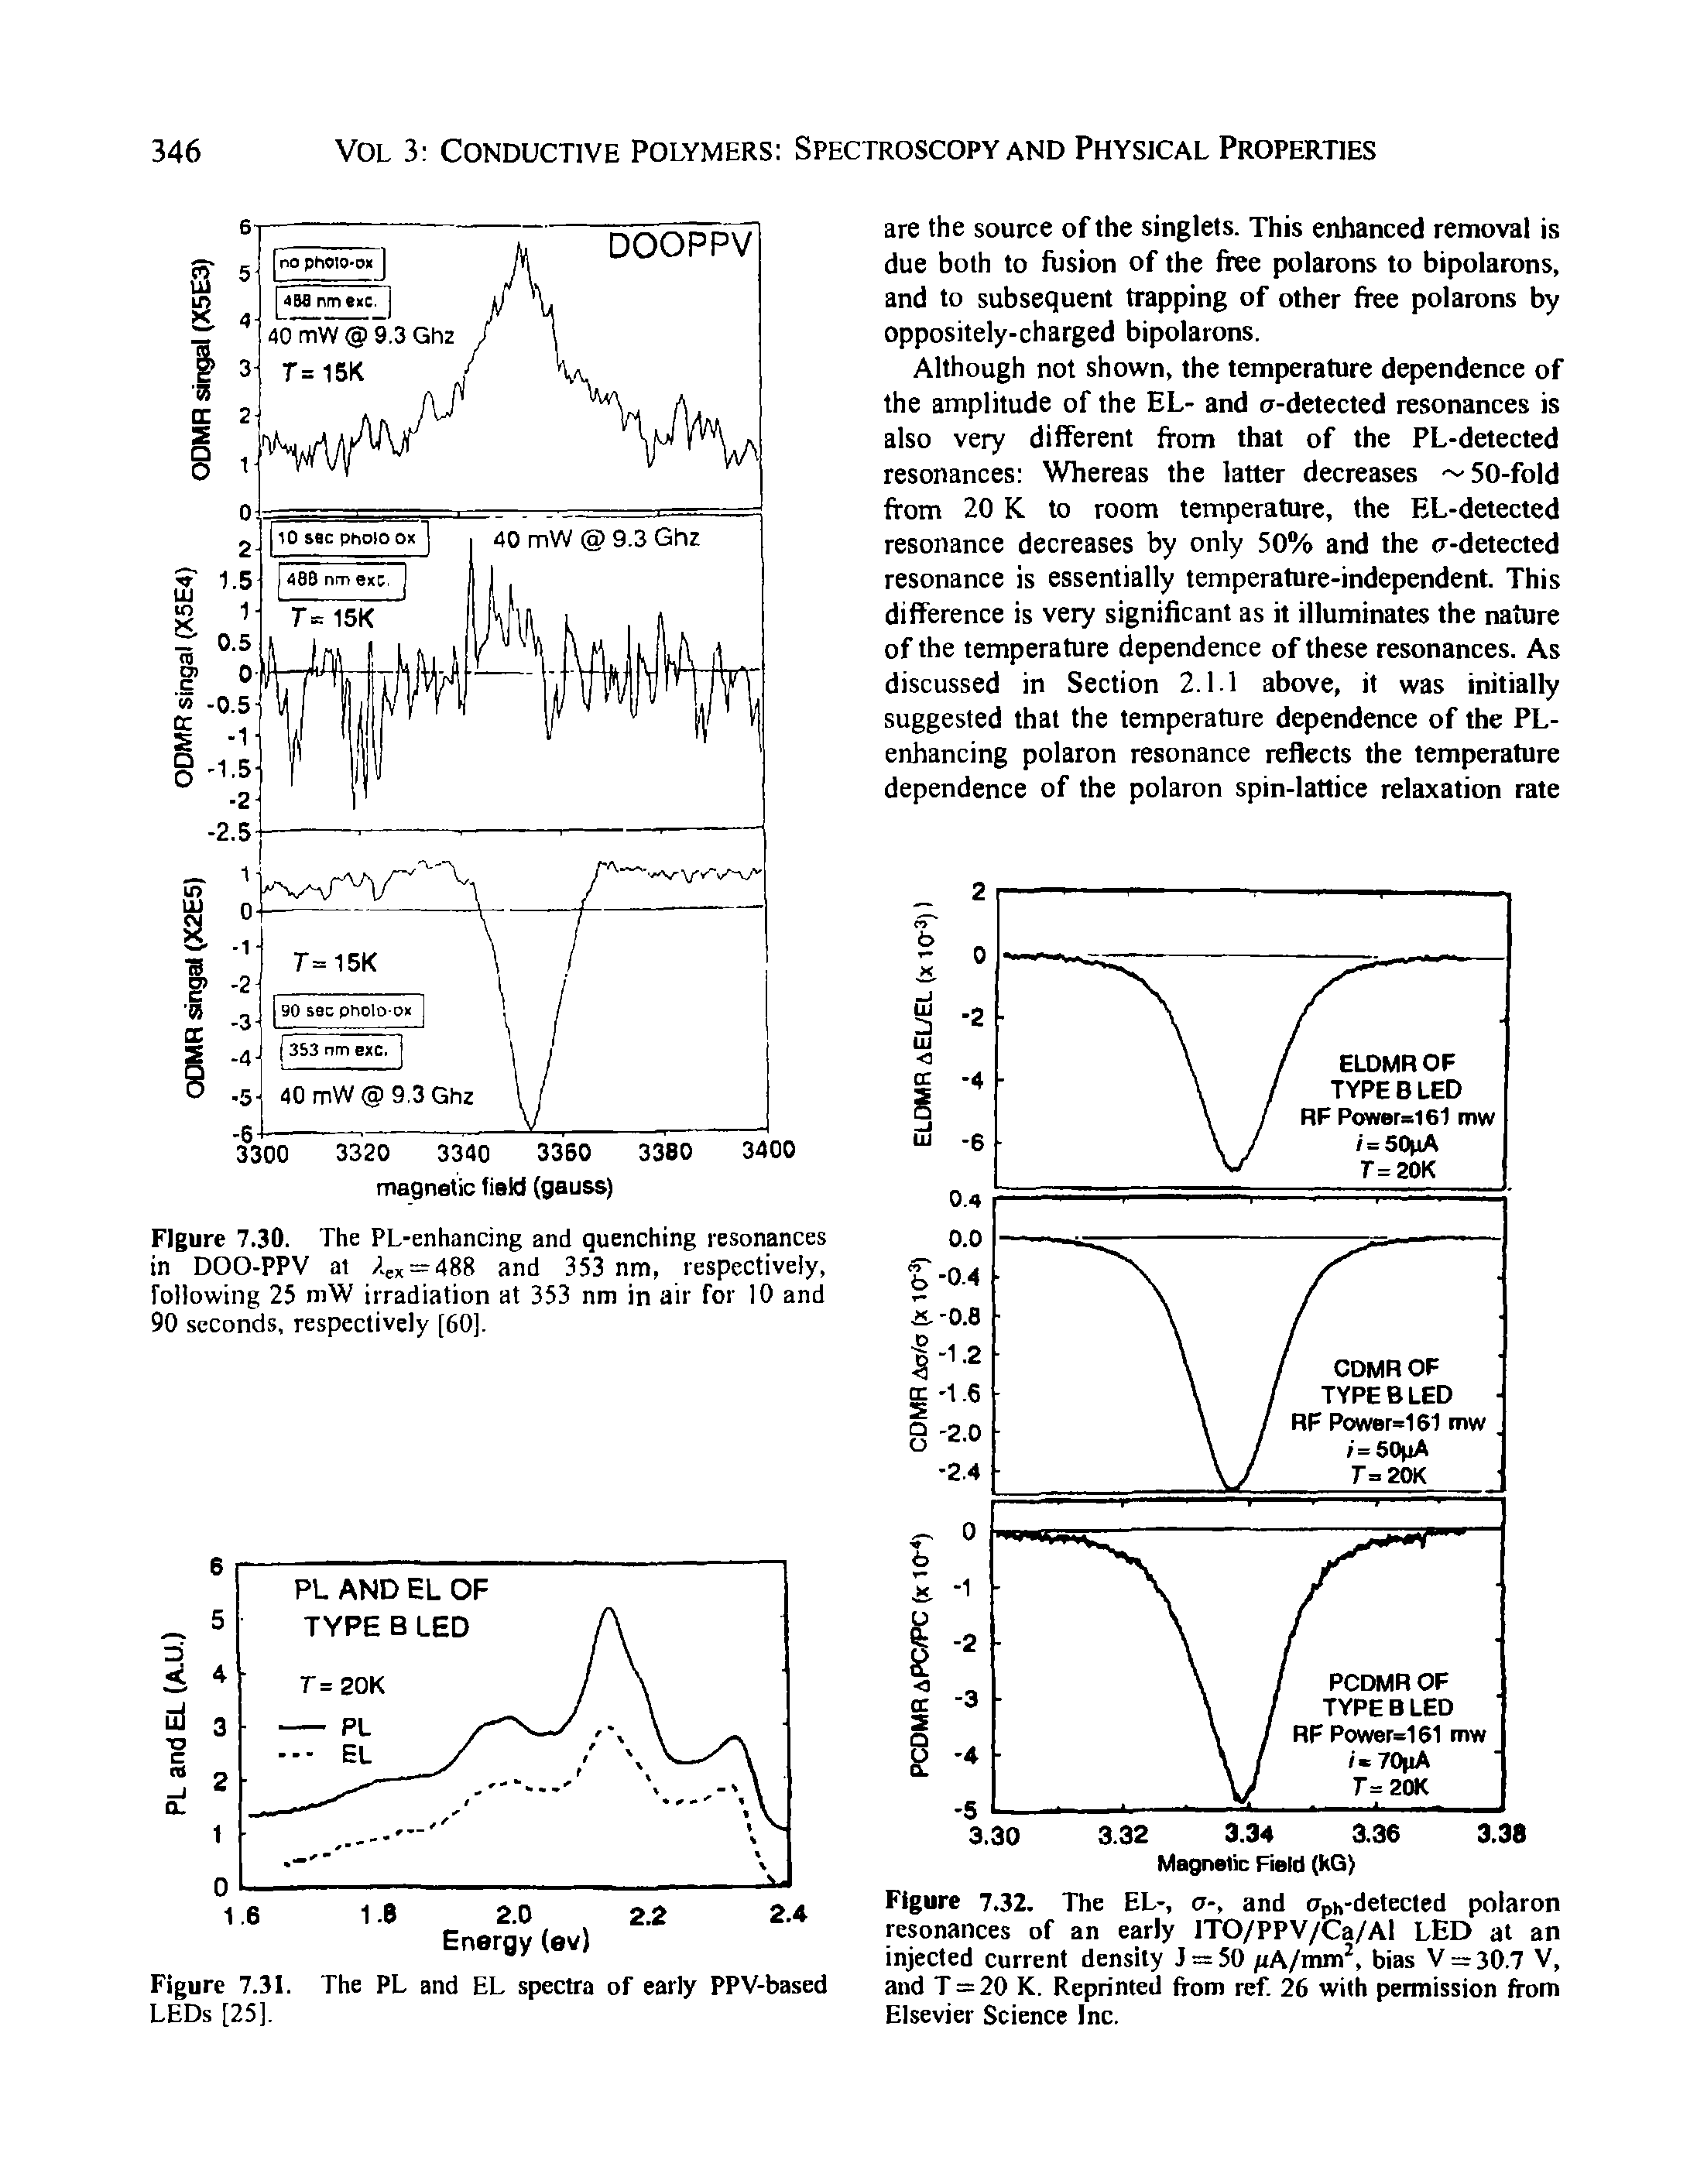 Figure 7.32. The EL-, a-, and Oph-detected polaron resonances of an early ITO/PPV/Ca/Al LED at an injected current density J = 50 /rA/mm, bias V =r 30.7 V, and T = 20 K. Reprinted from ref. 26 with permission from Elsevier Science Inc.